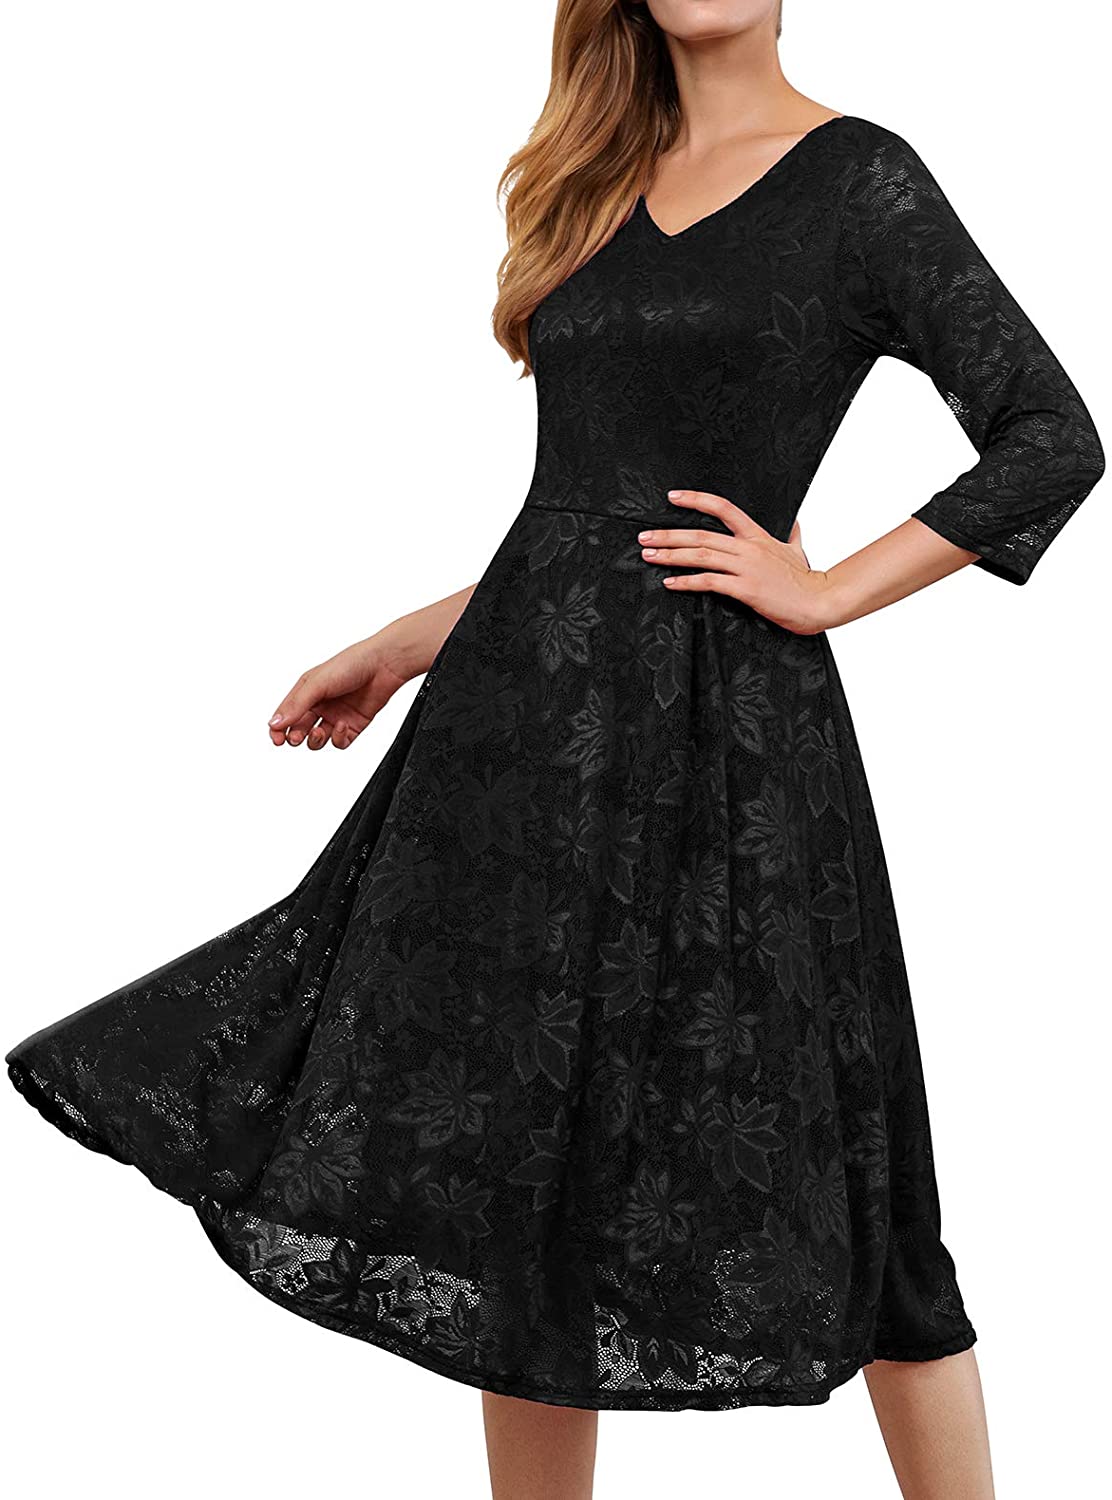 Noctflos Women S 3 4 Sleeves Lace Fit And Flare Midi Cocktail Dress For Women Part Ebay